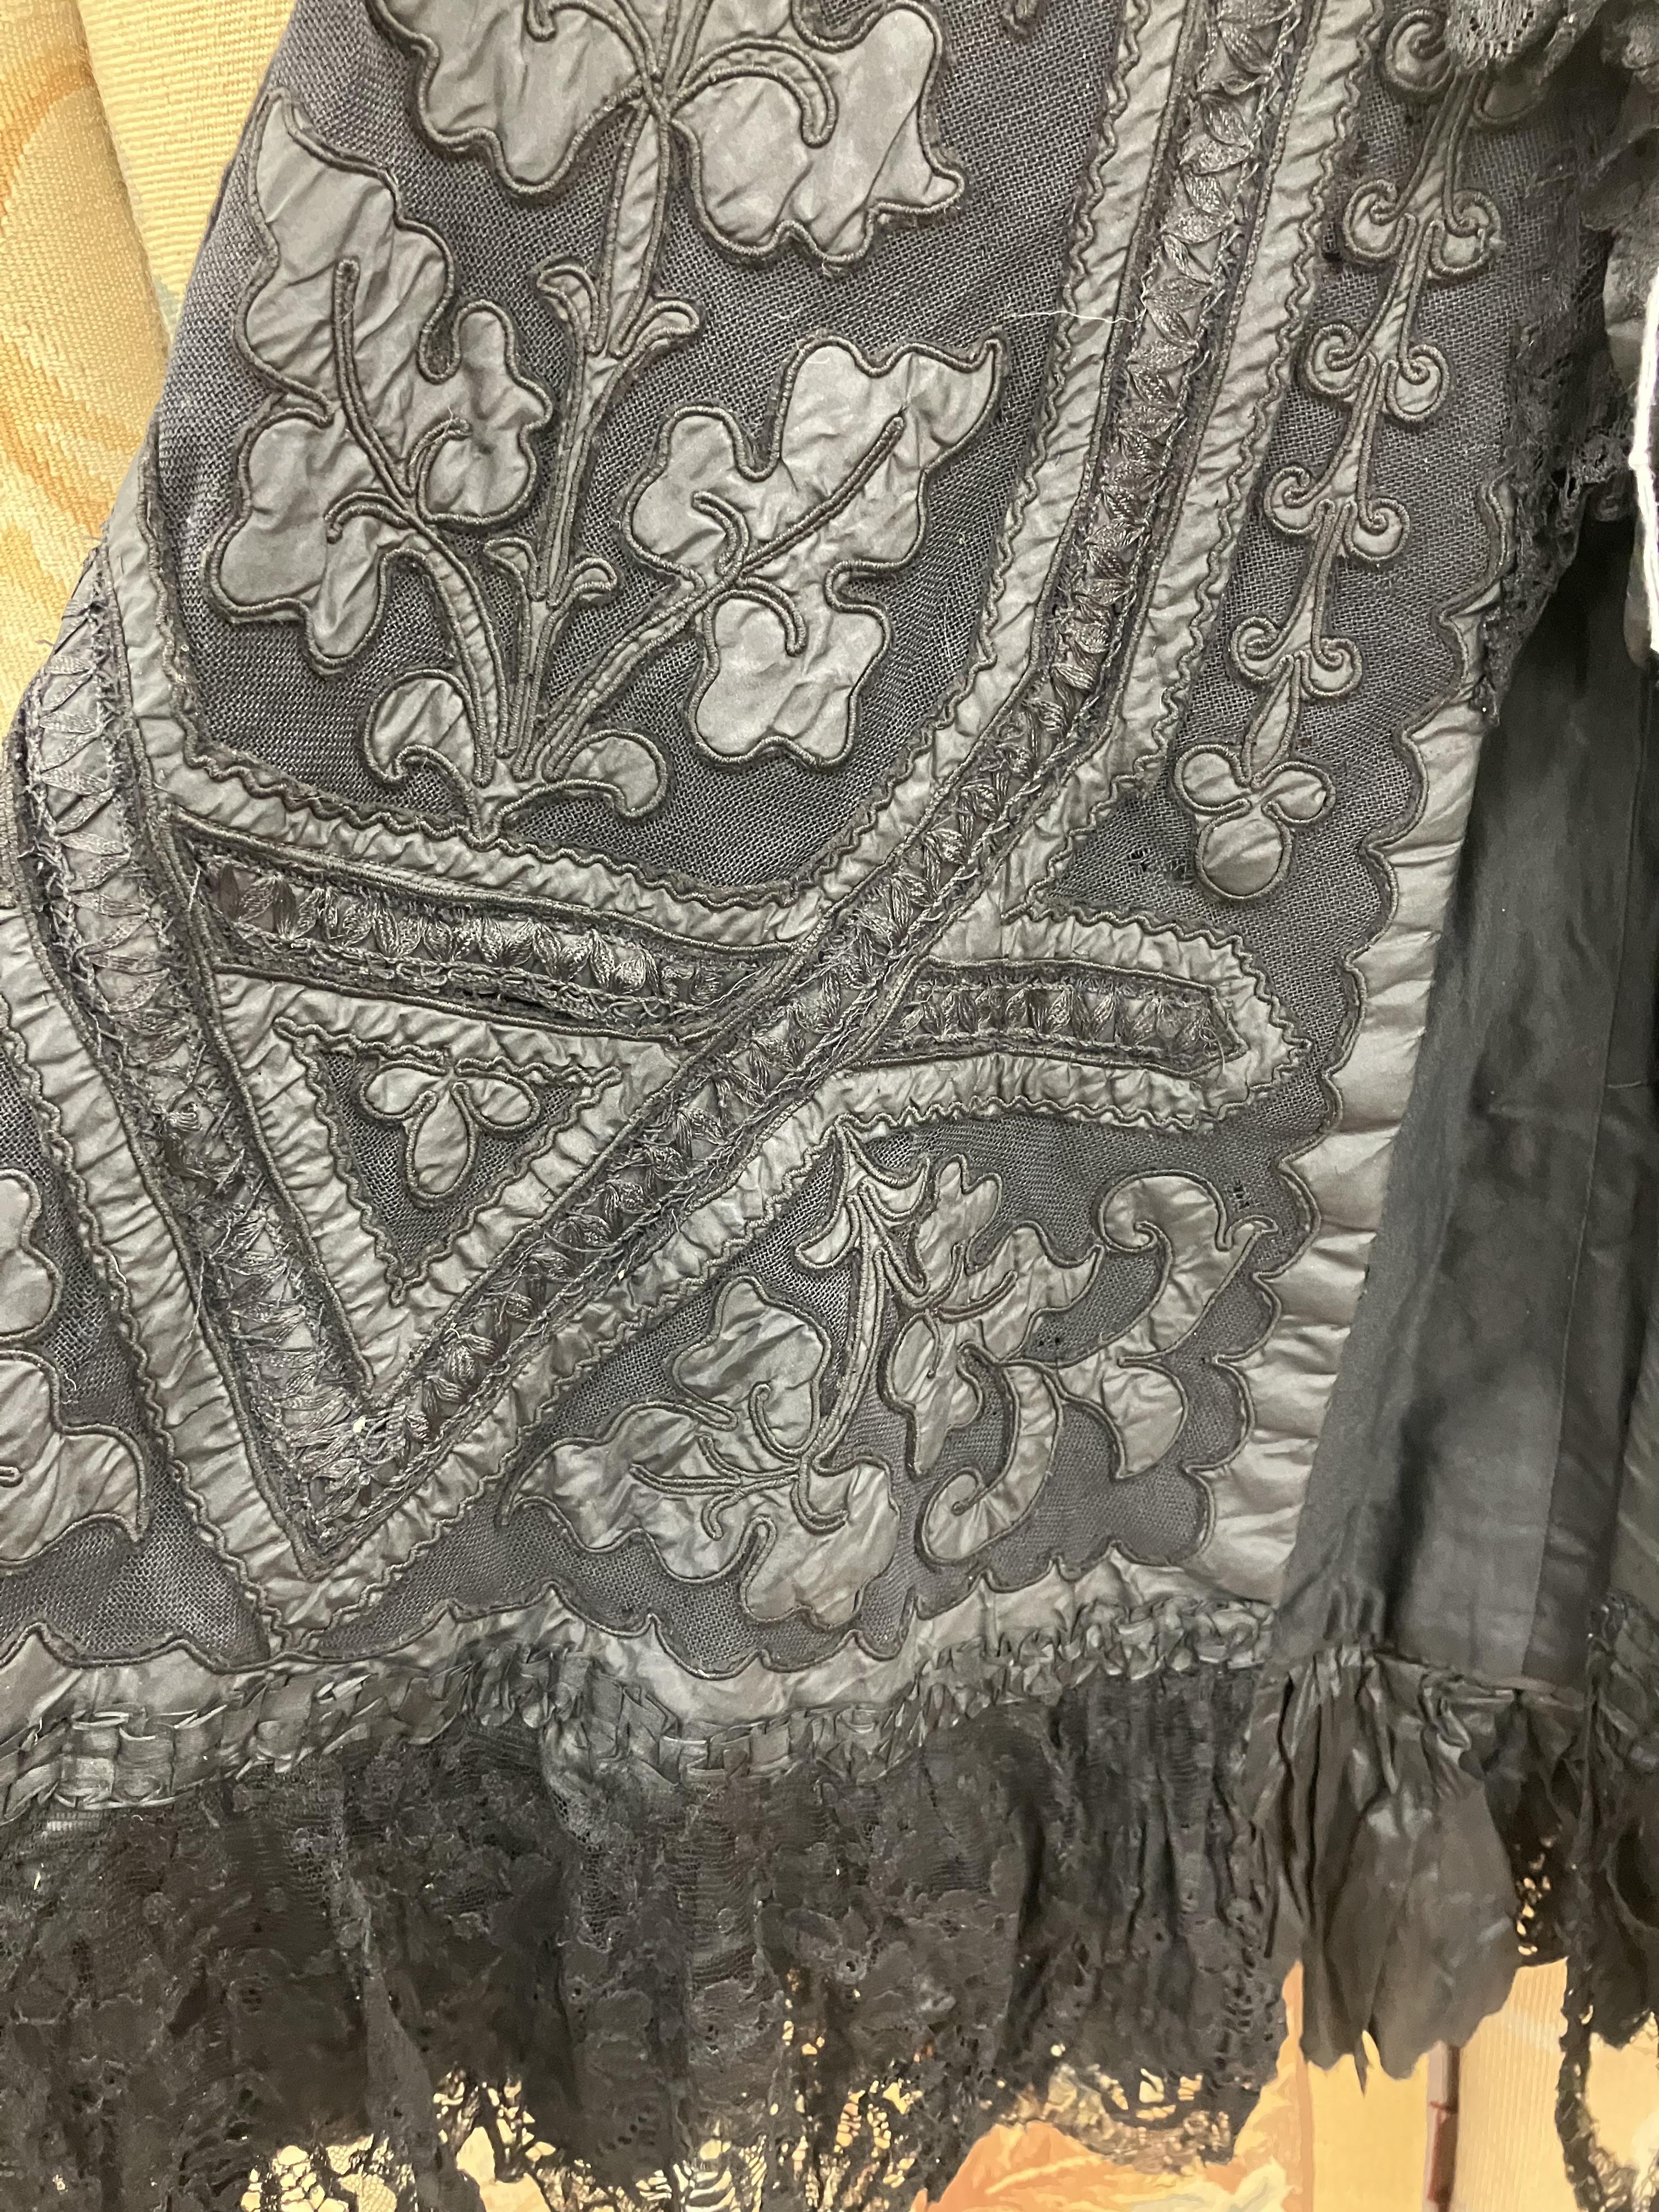 A Victorian mourning cape with applique decoration and lace edge together with a Victorian style - Image 110 of 115